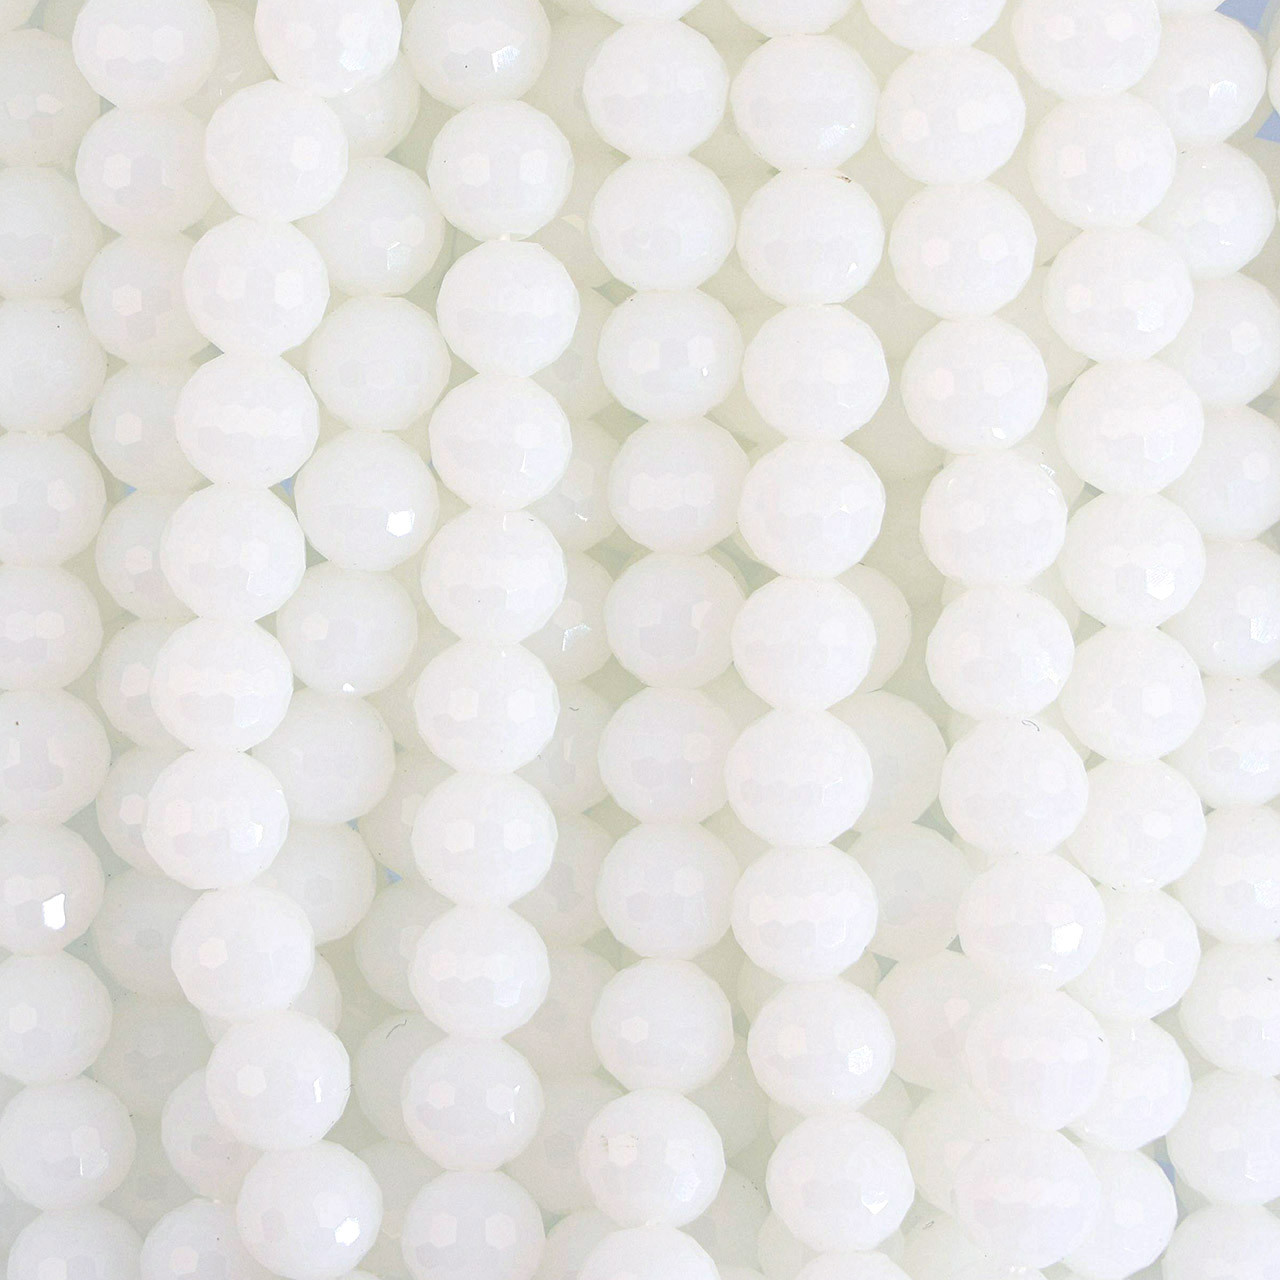 8mm Round Faceted Glass Beads - Cloudy White